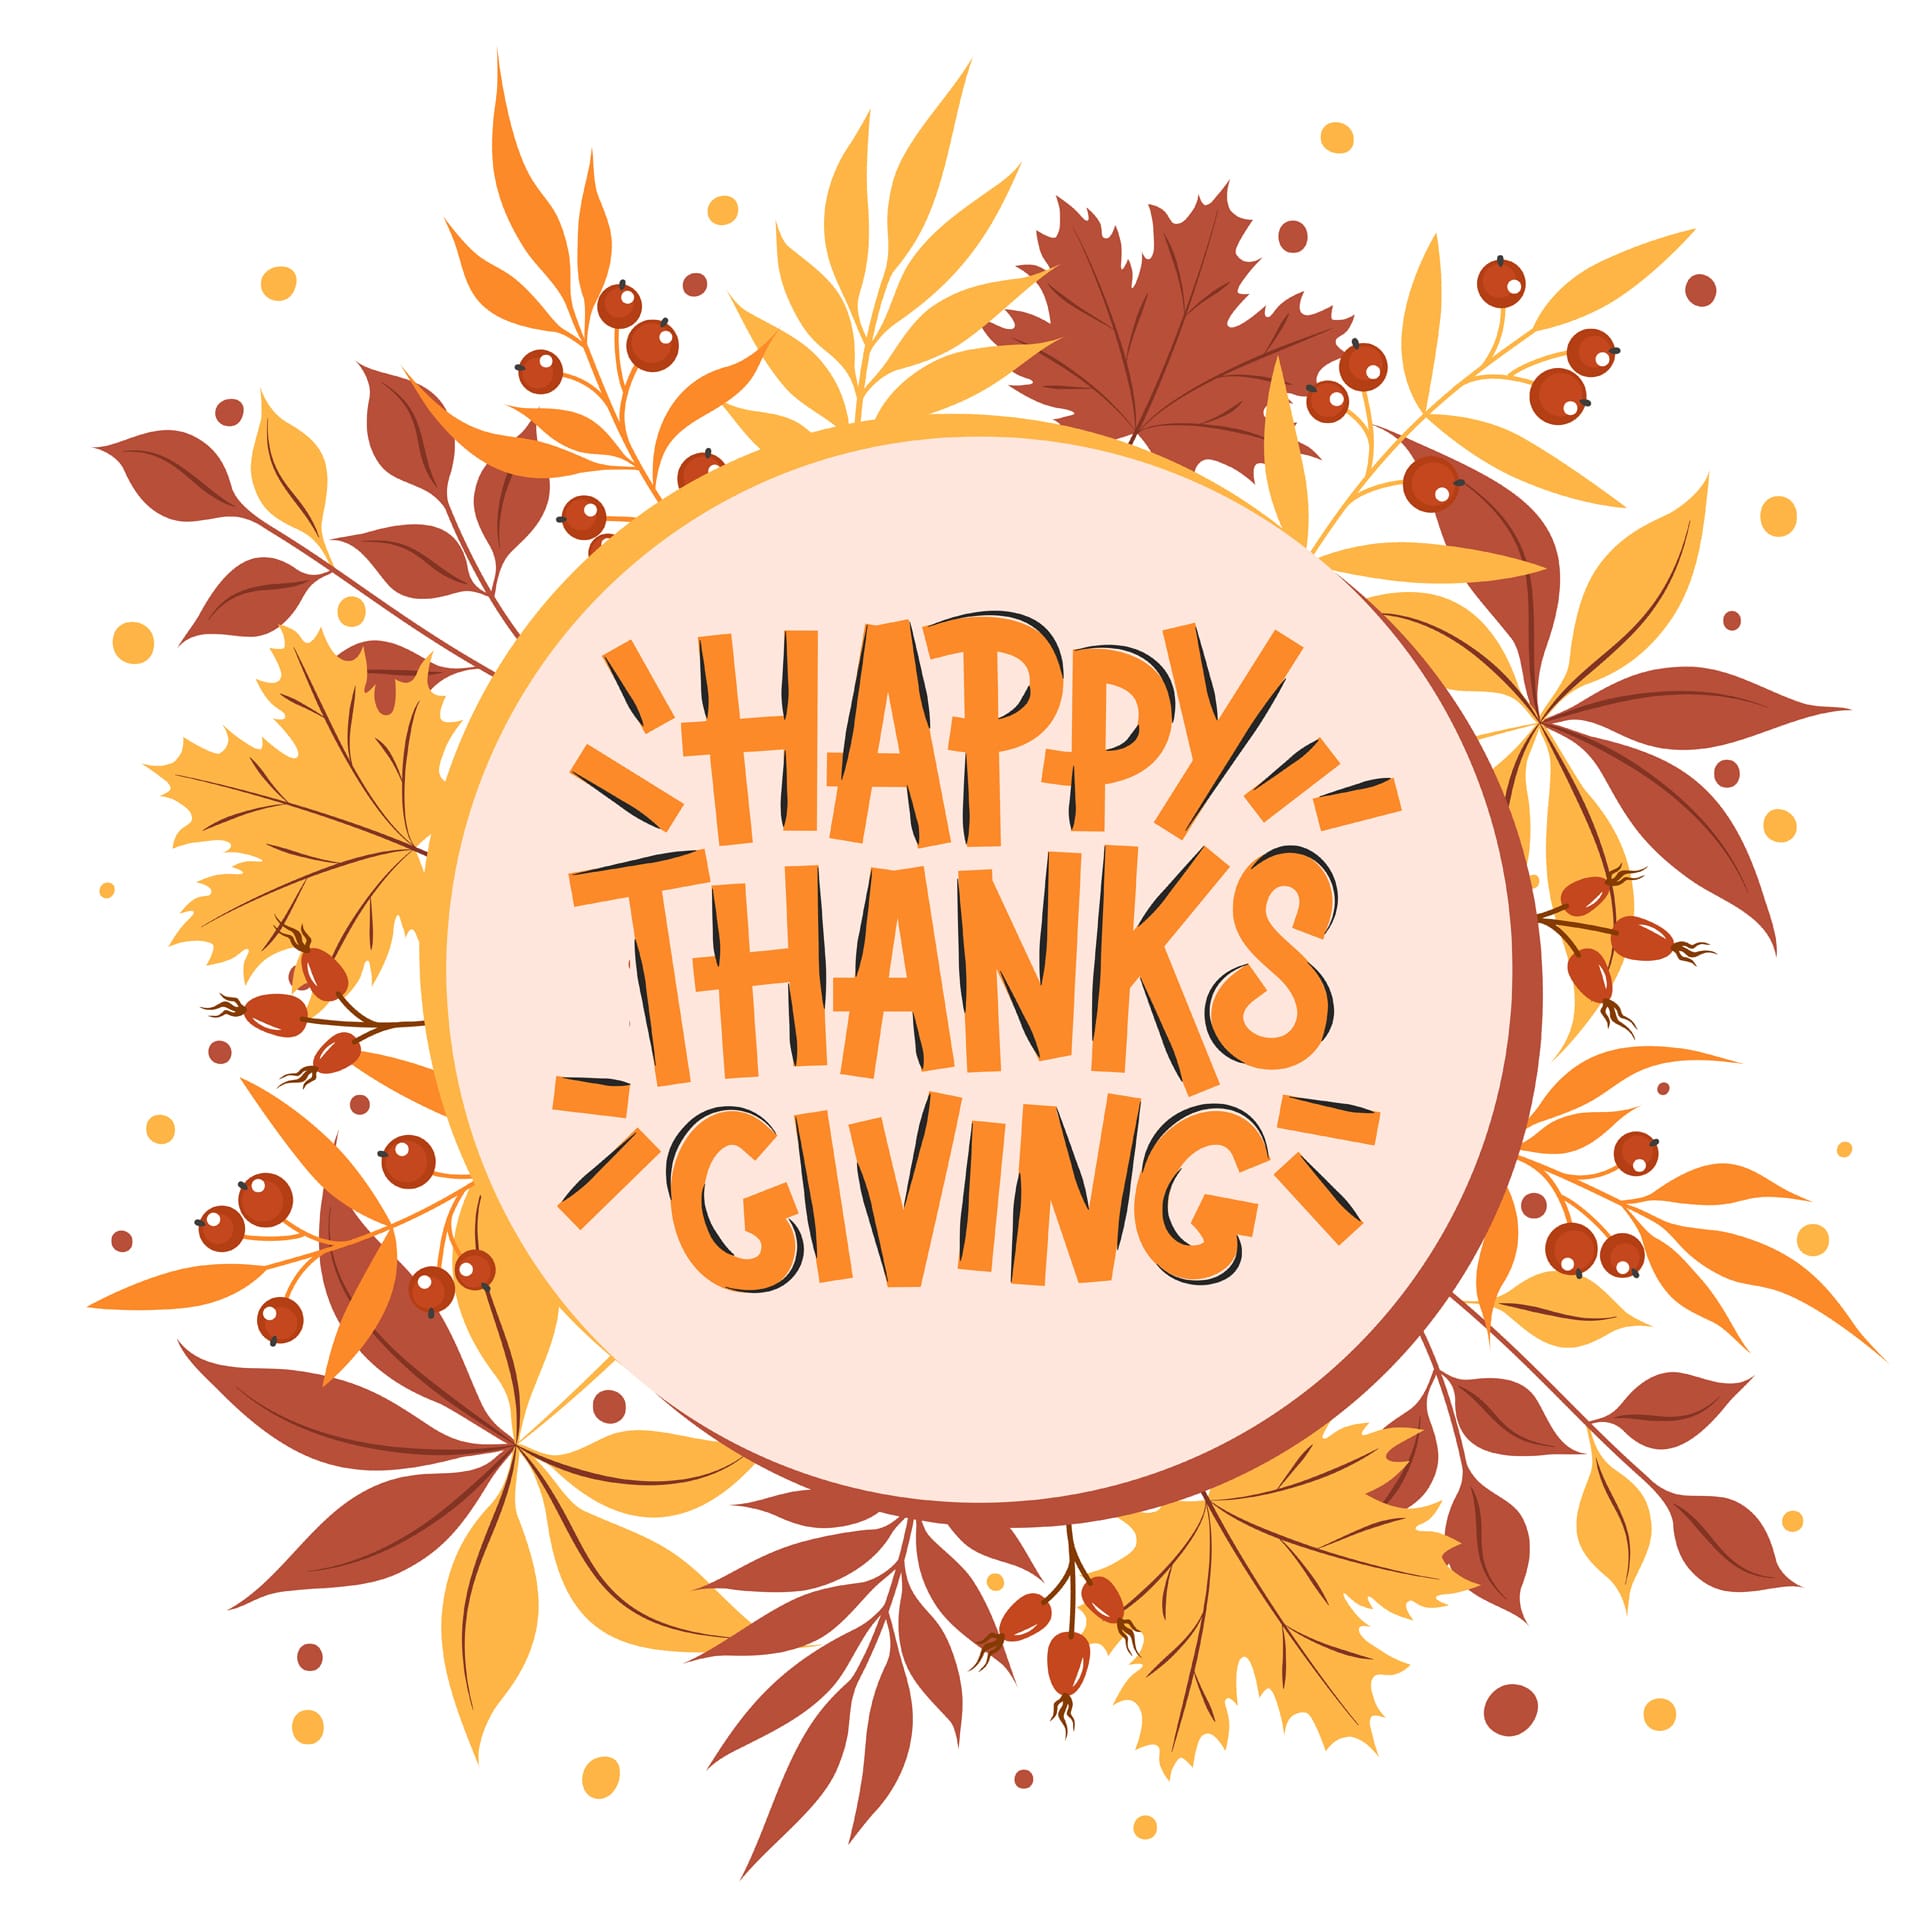 Thanksgiving art with beautiful bright leaves white background image